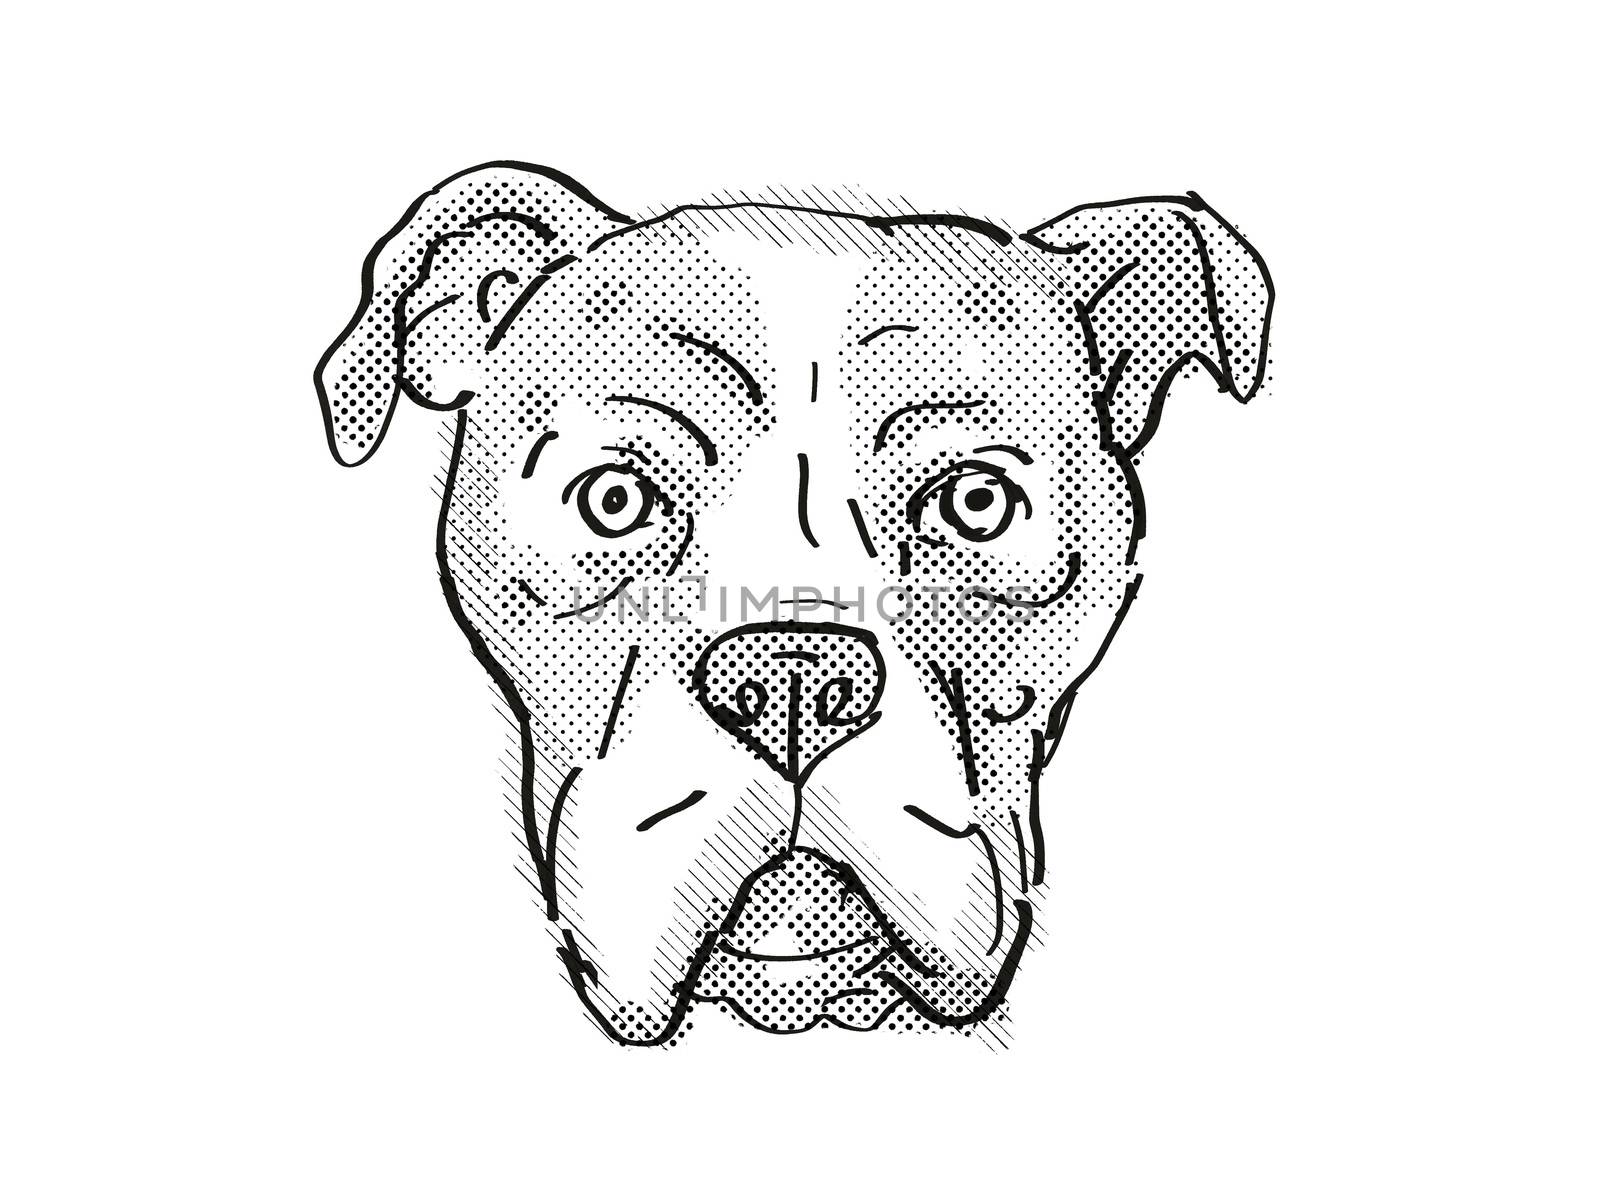 Retro cartoon style drawing of head of a Bullboxer Pit also sometimes called the Pixoter or American Bullboxer, a domestic dog or canine breed on isolated white background done in black and white.